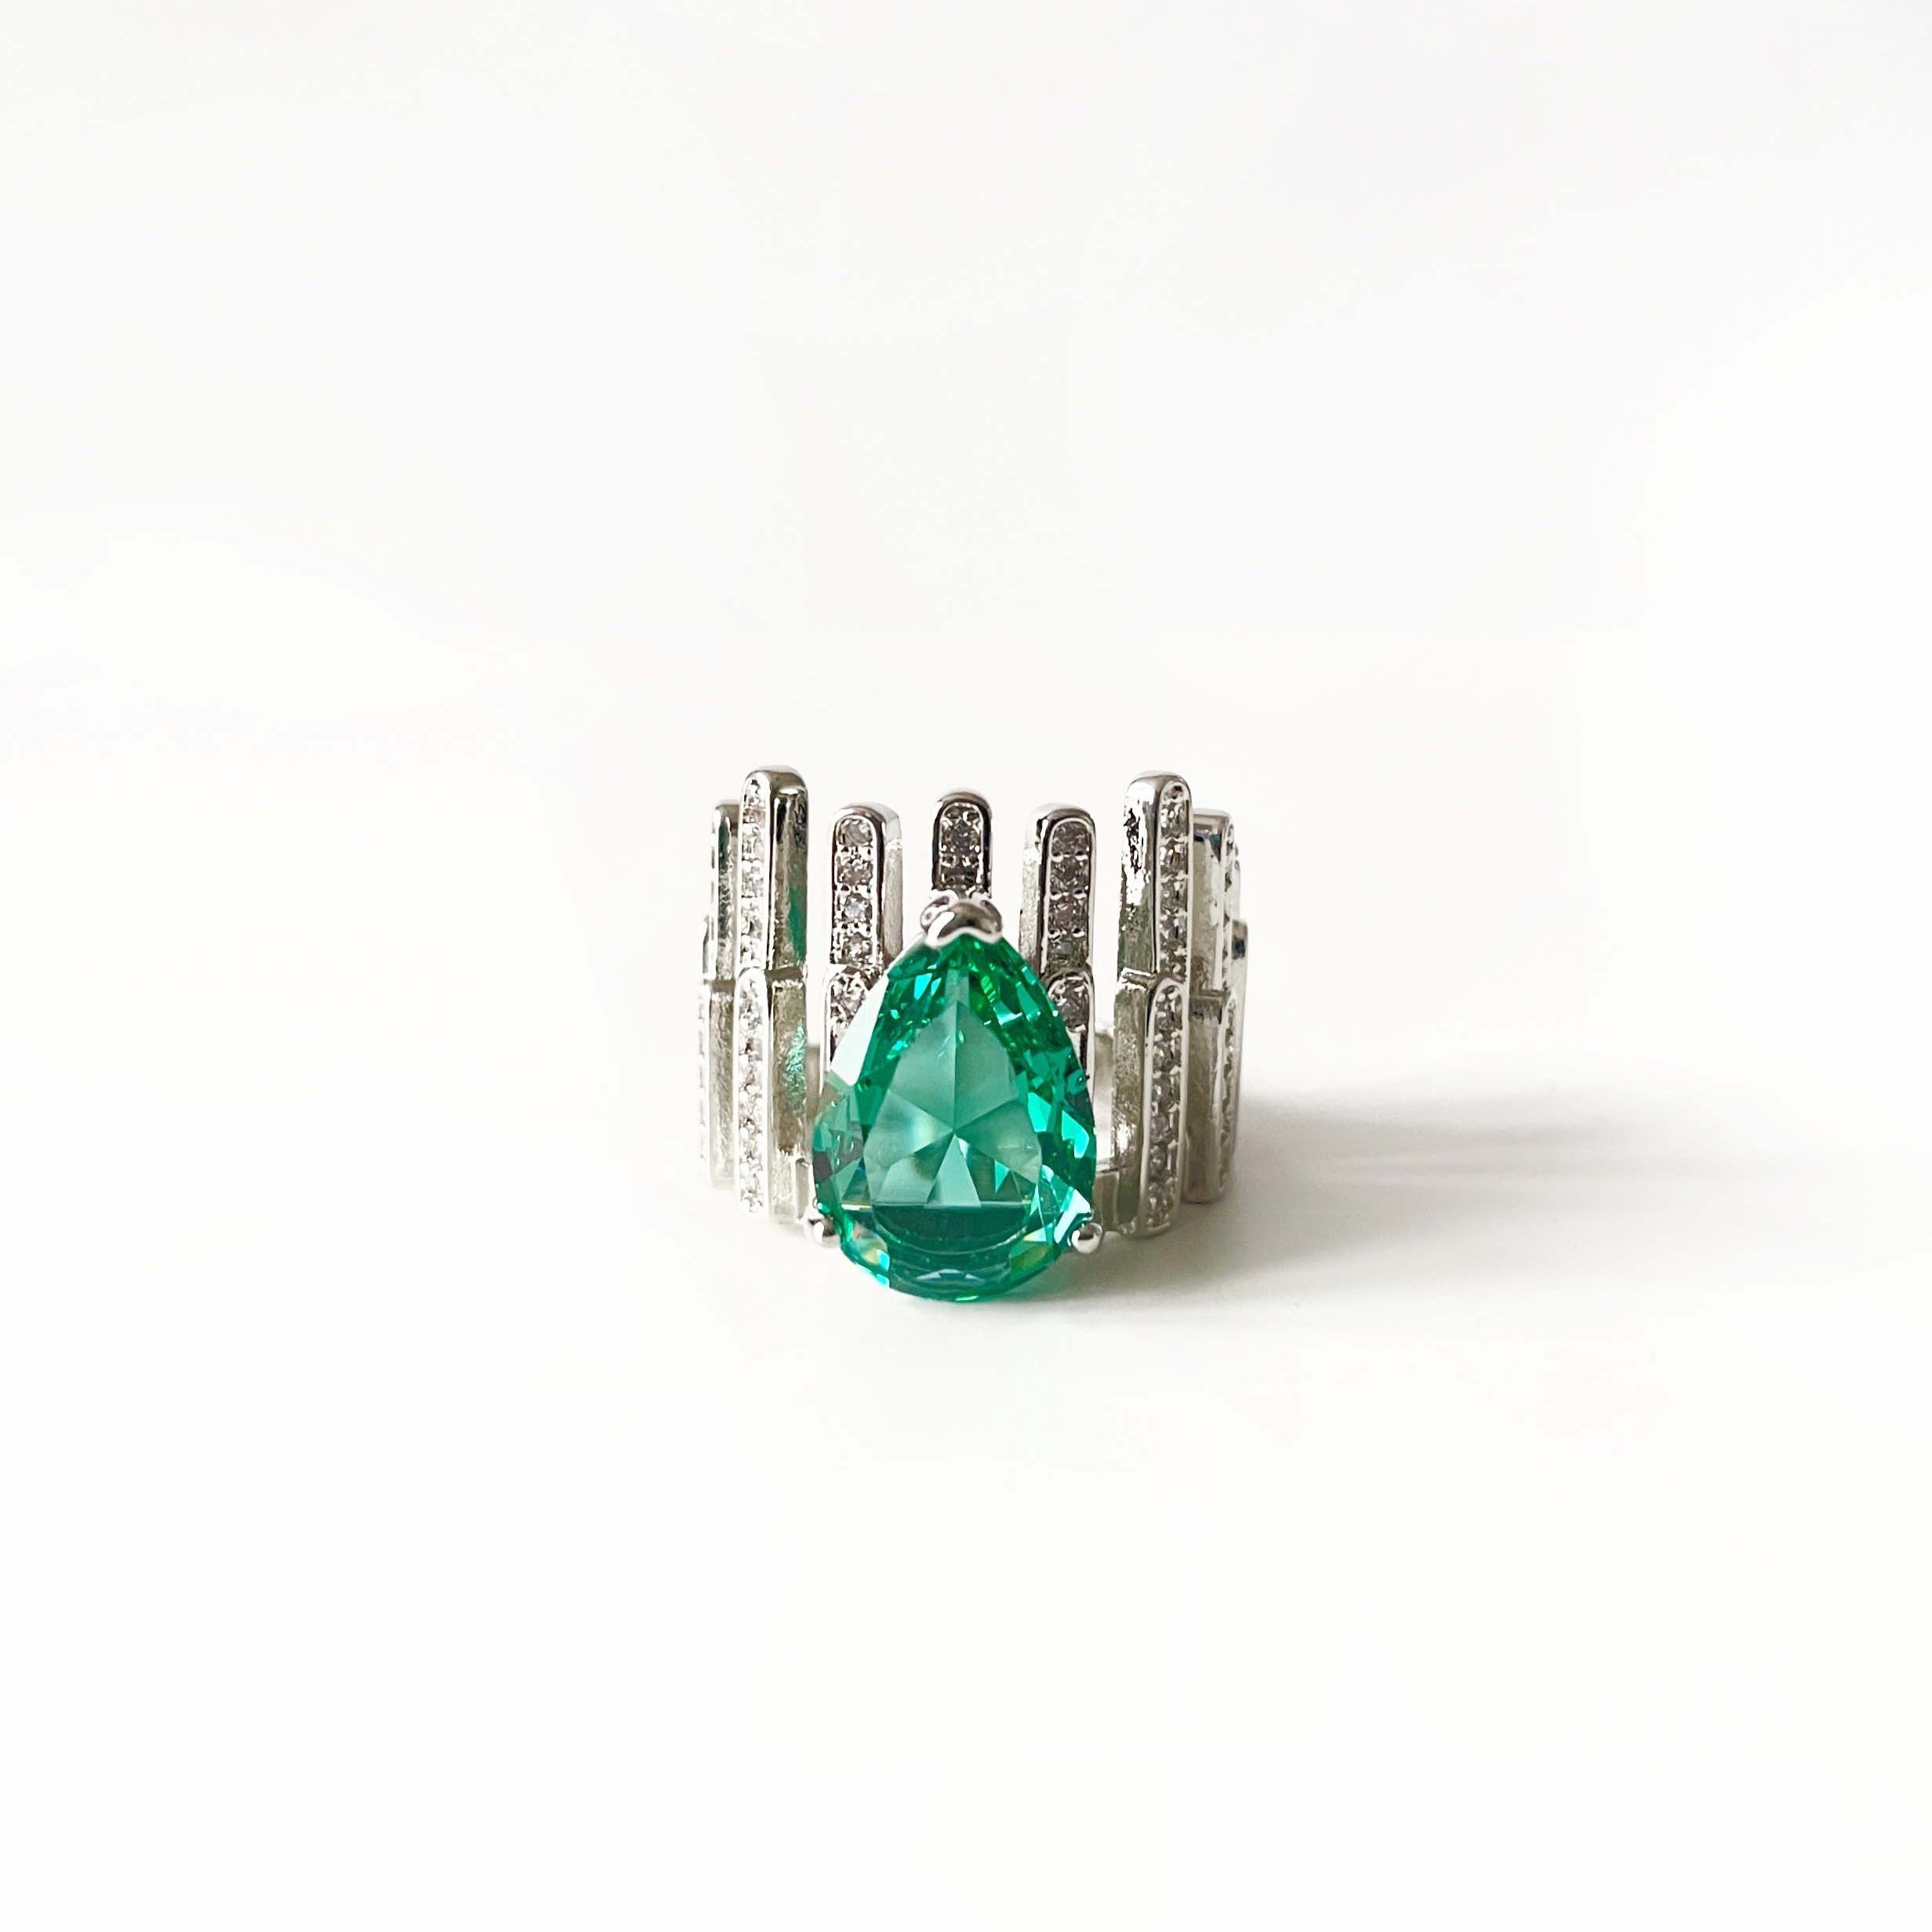 Neela Statement Faceted Jewel Cocktail Ring